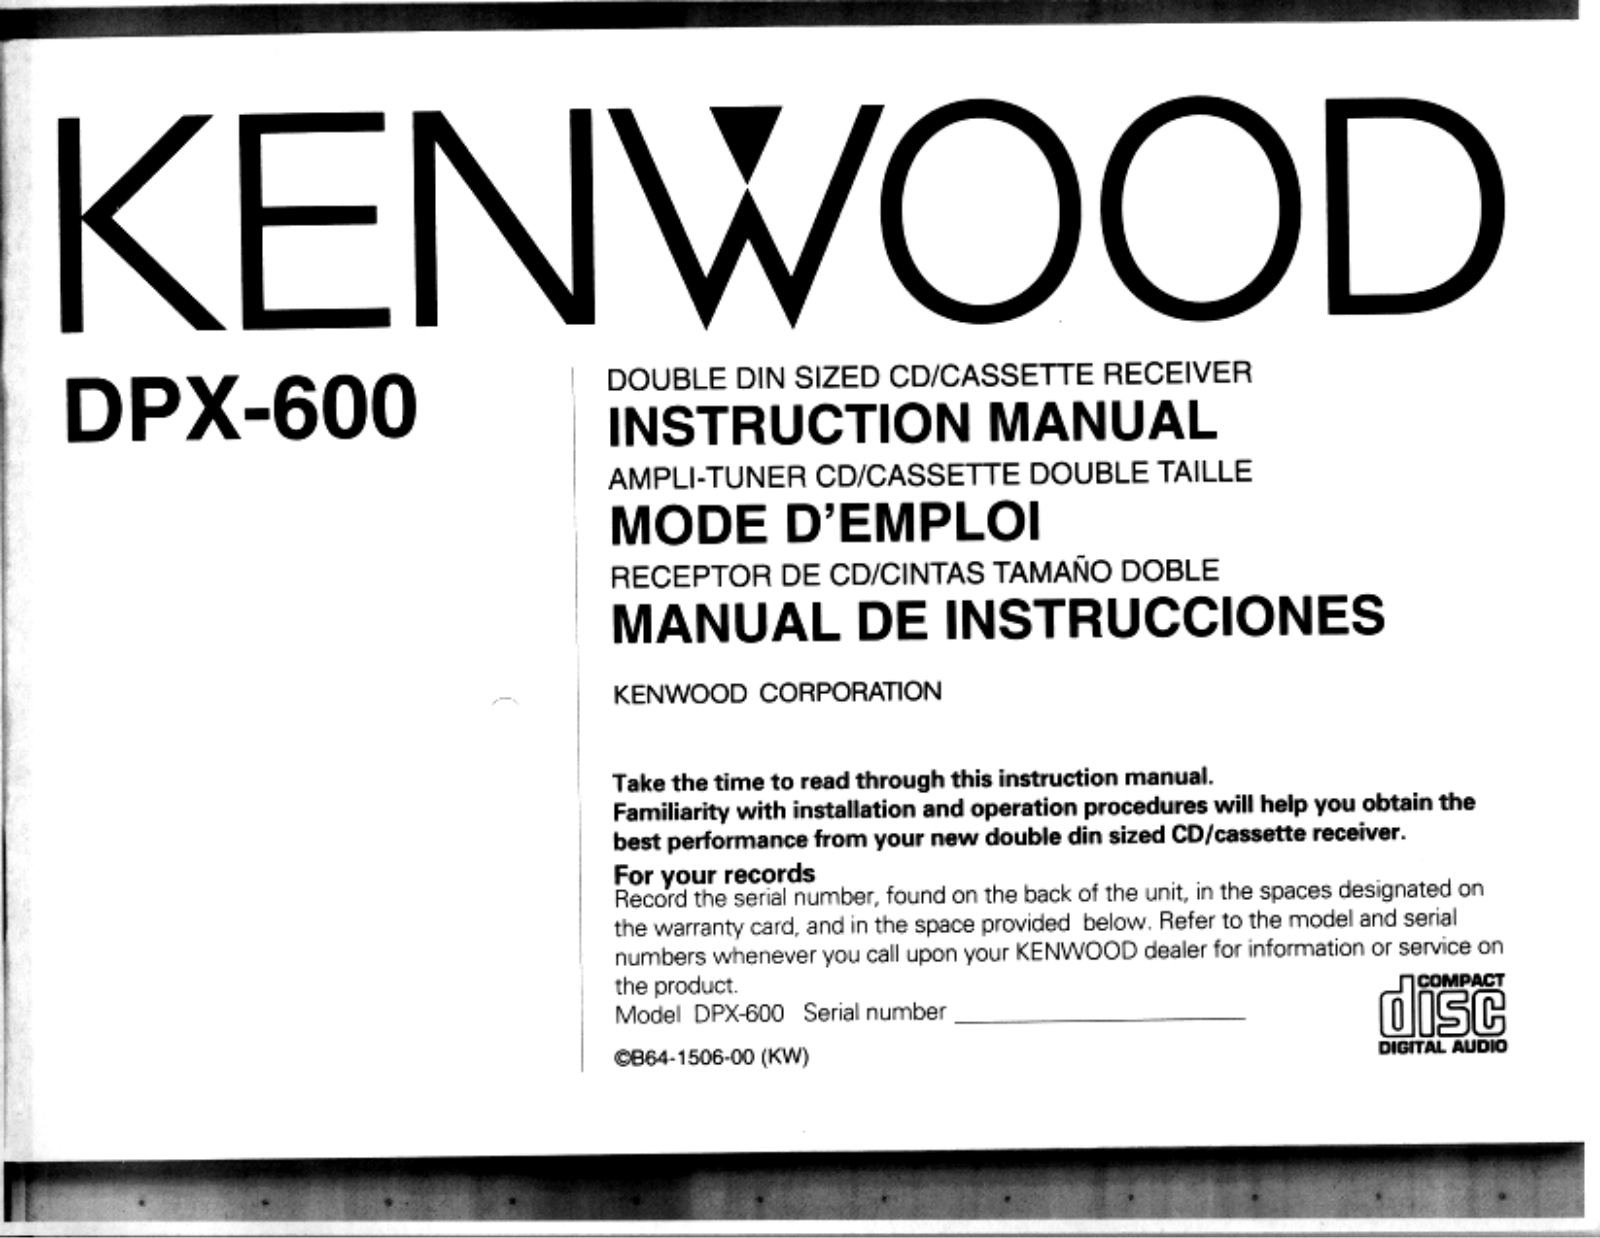 Kenwood DPX-600 Owner's Manual